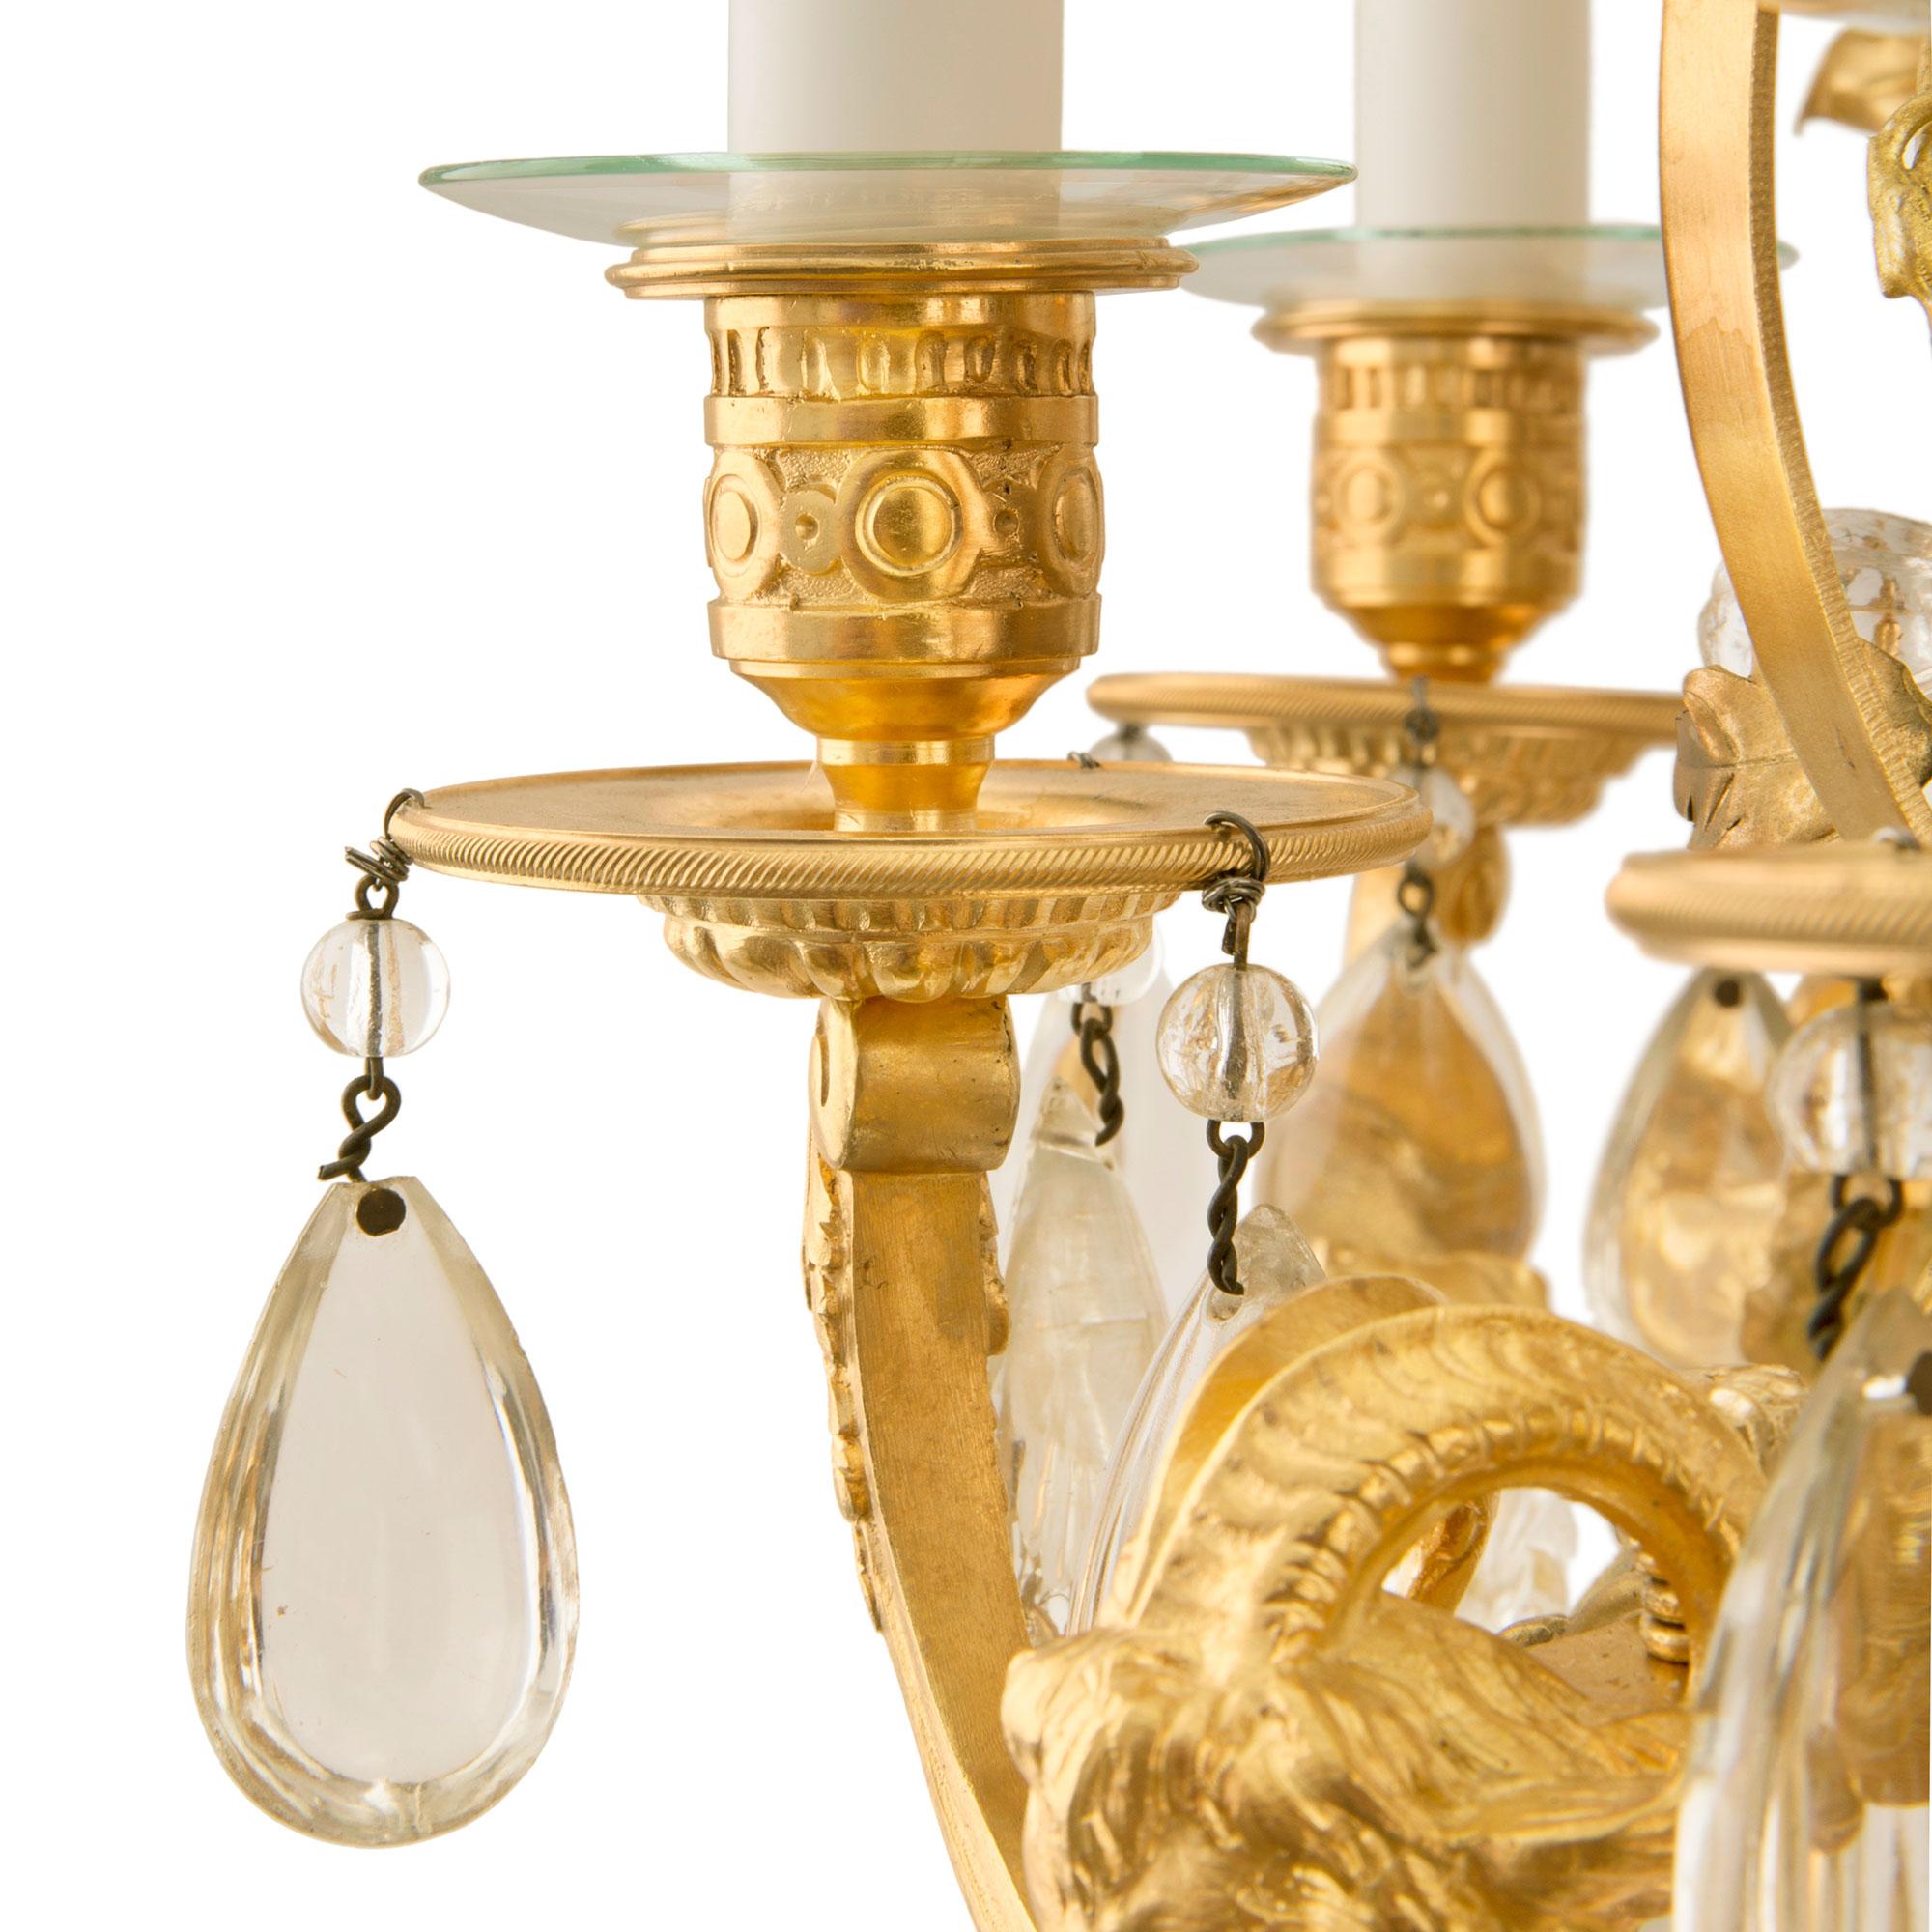 French 19th Century Belle Époque Period Ormolu and Baccarat Crystal Chandelier For Sale 4